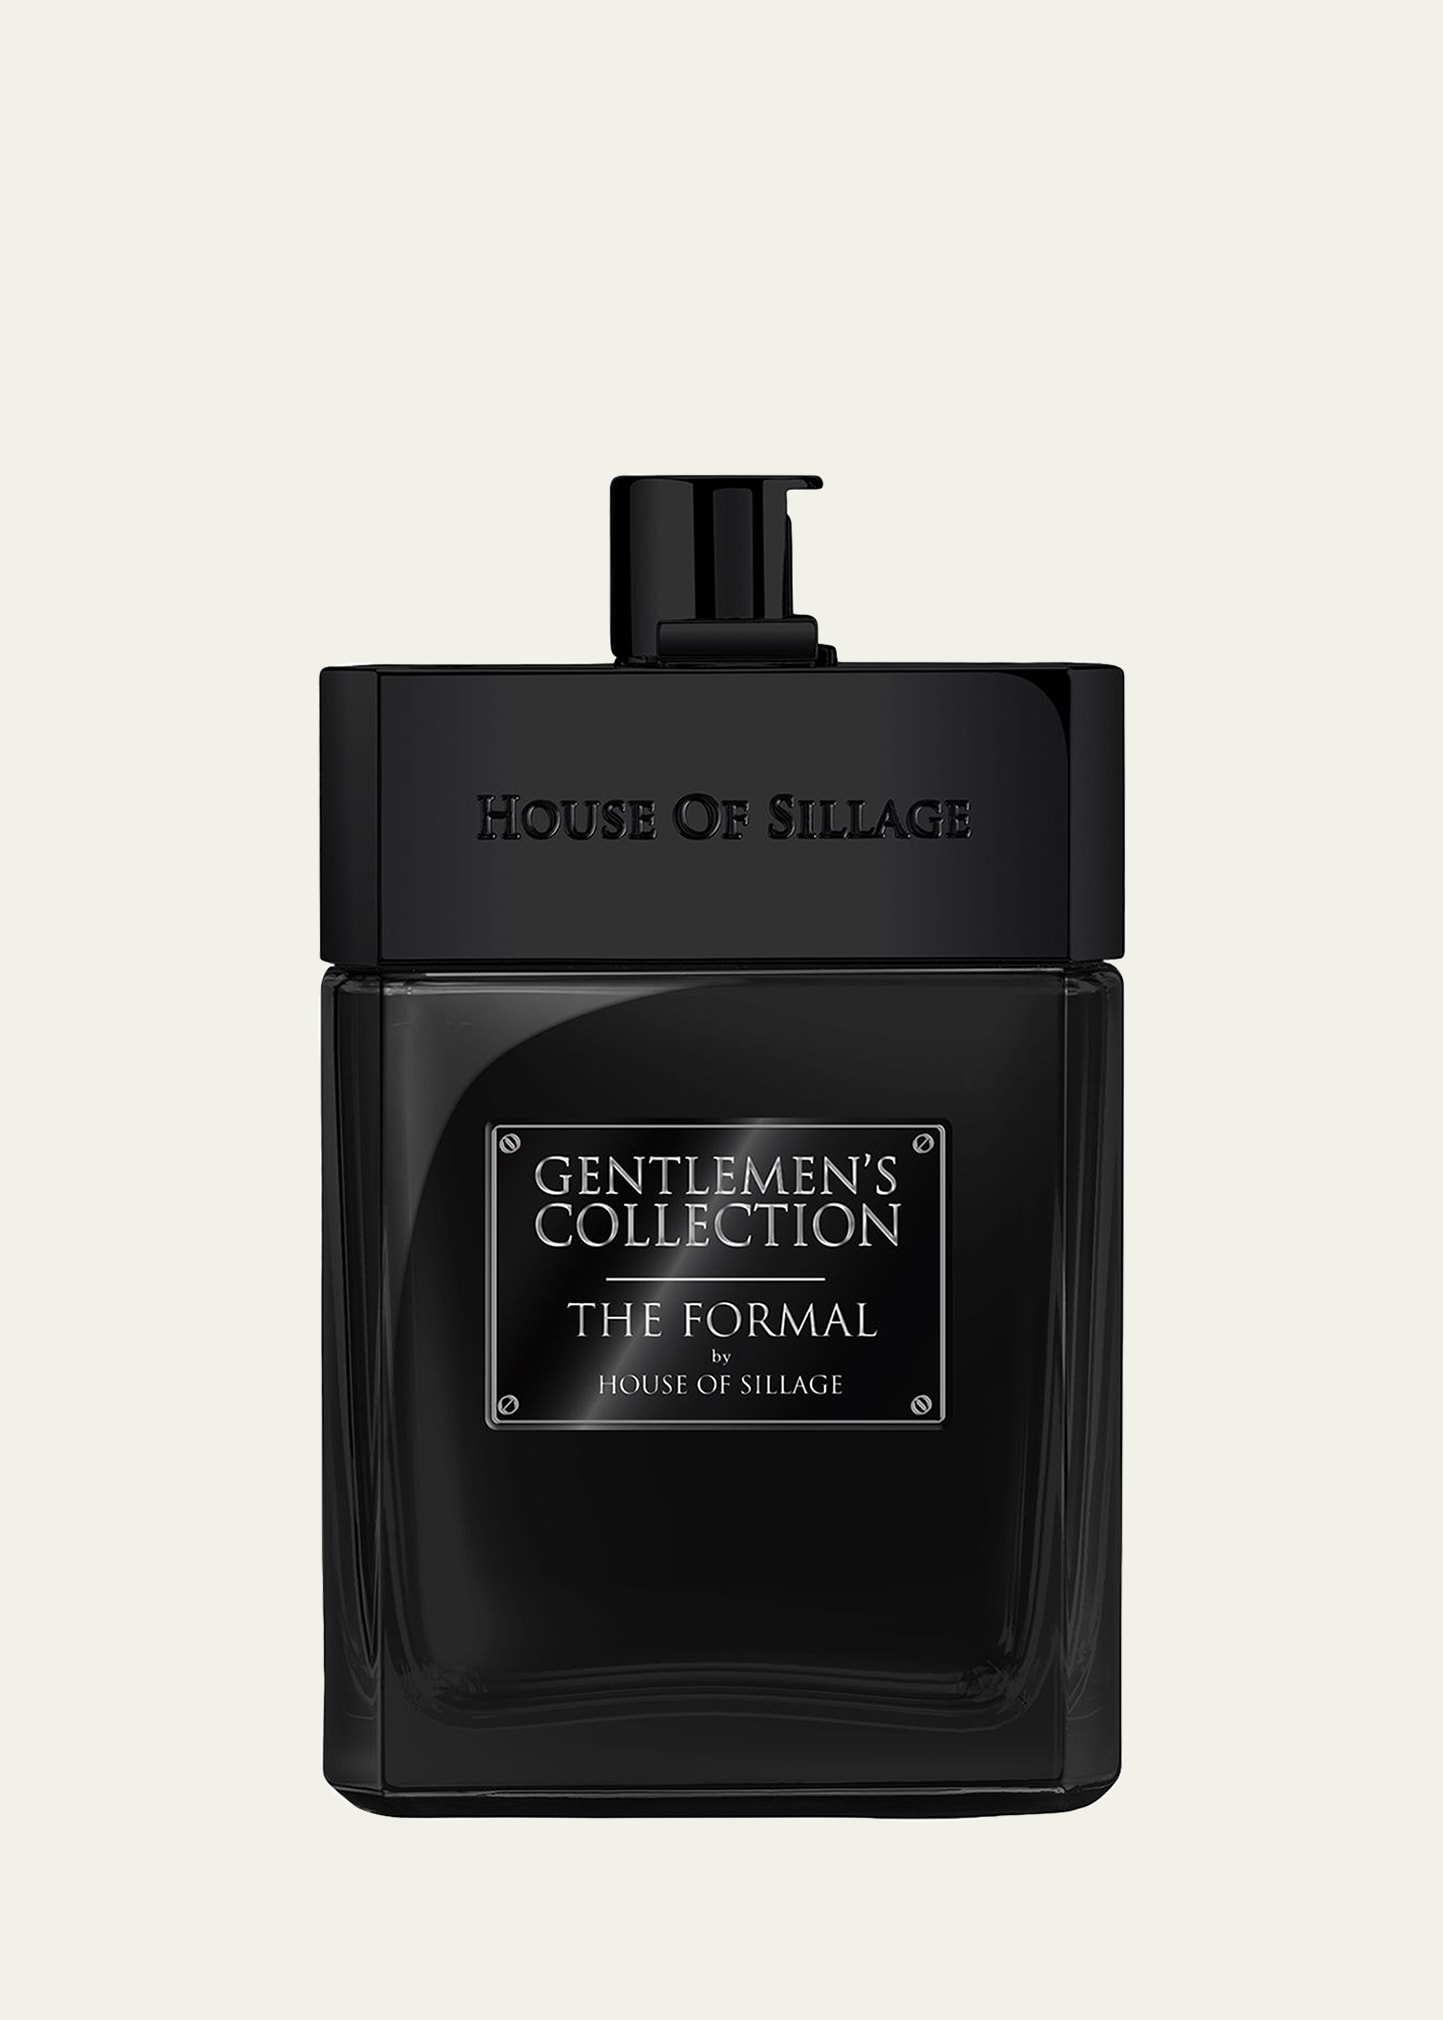 House of Sillage Gentlemen's Collection The Formal, 2.5 oz./ 75 mL